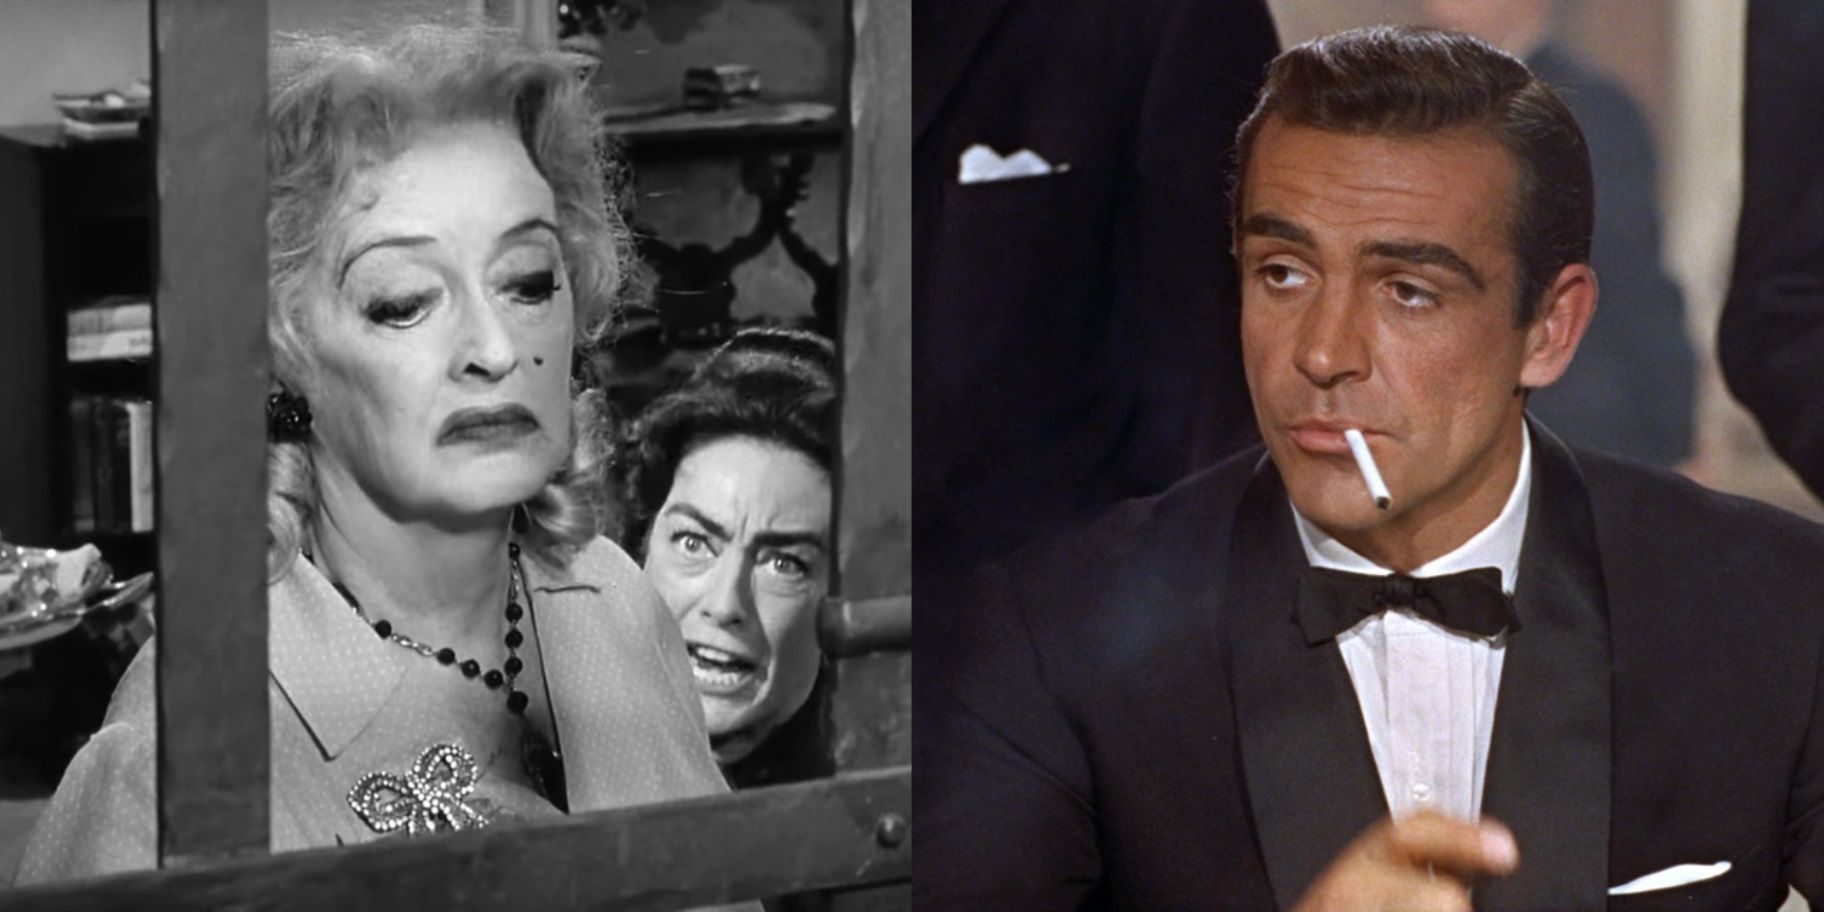 Split image of Baby Jane Hudson in What Ever Happened to Baby Jane and James Bond in Dr No